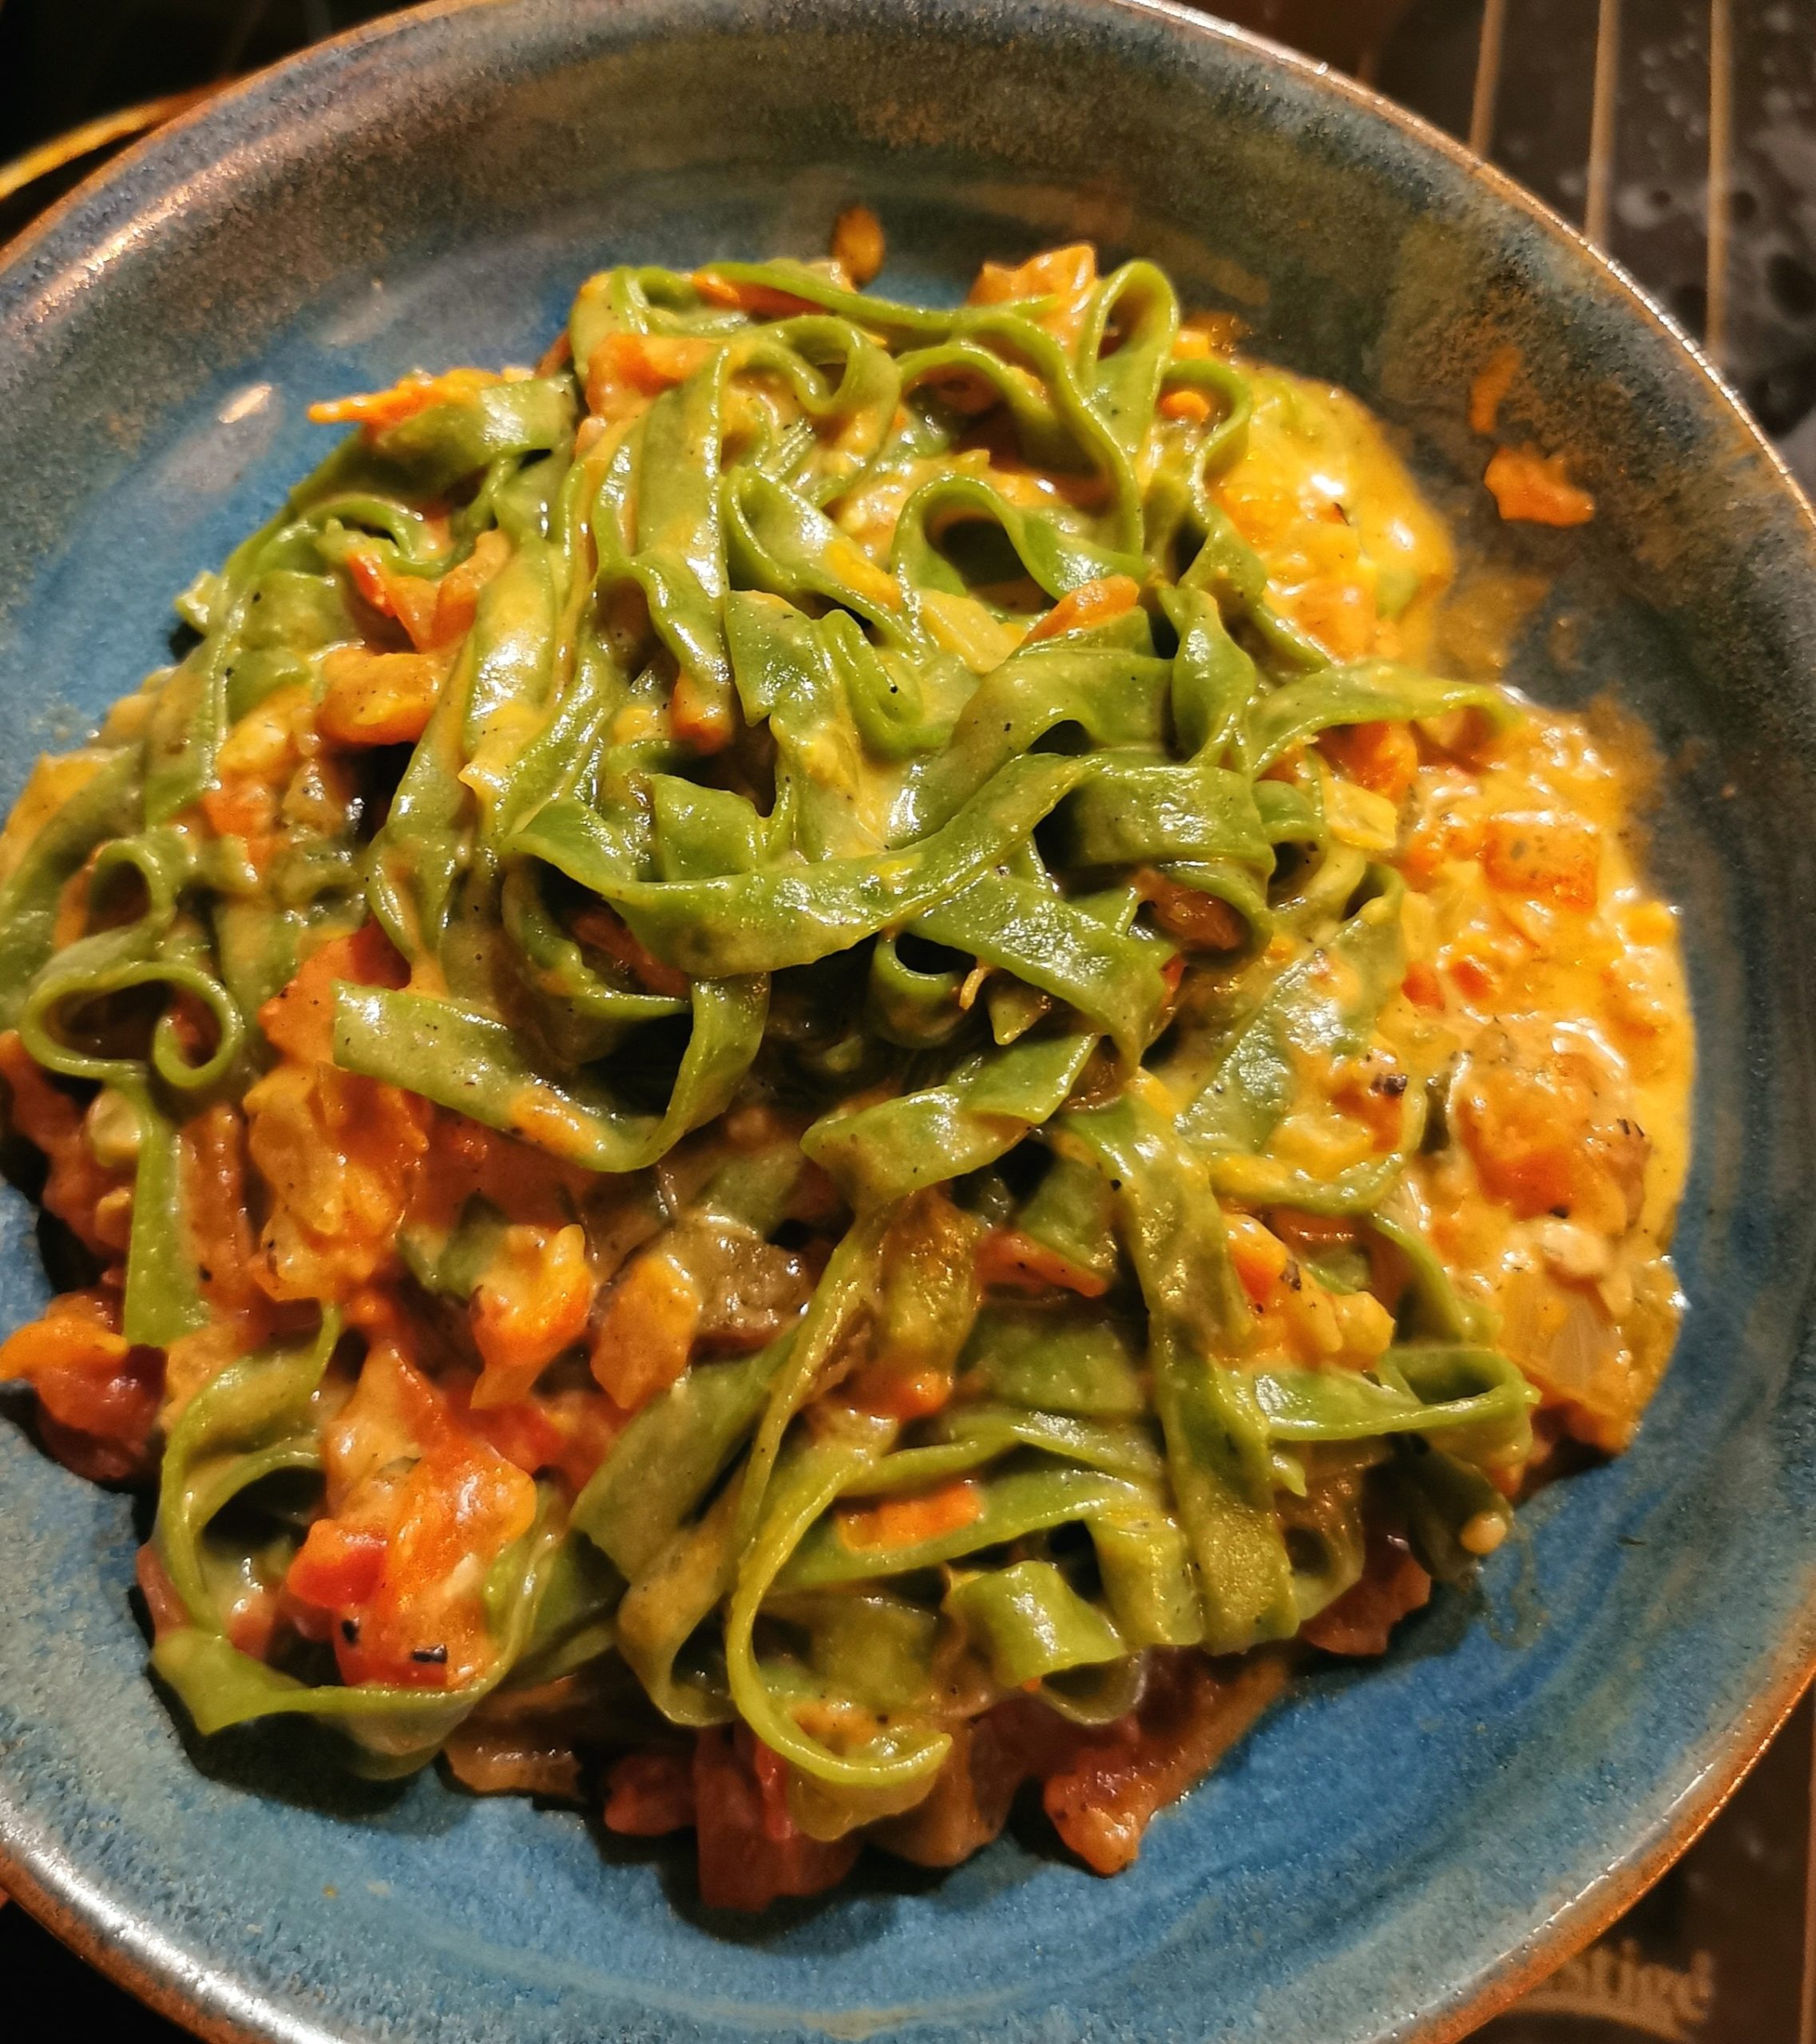 Green Pasta with Home Made Tomato Sauce